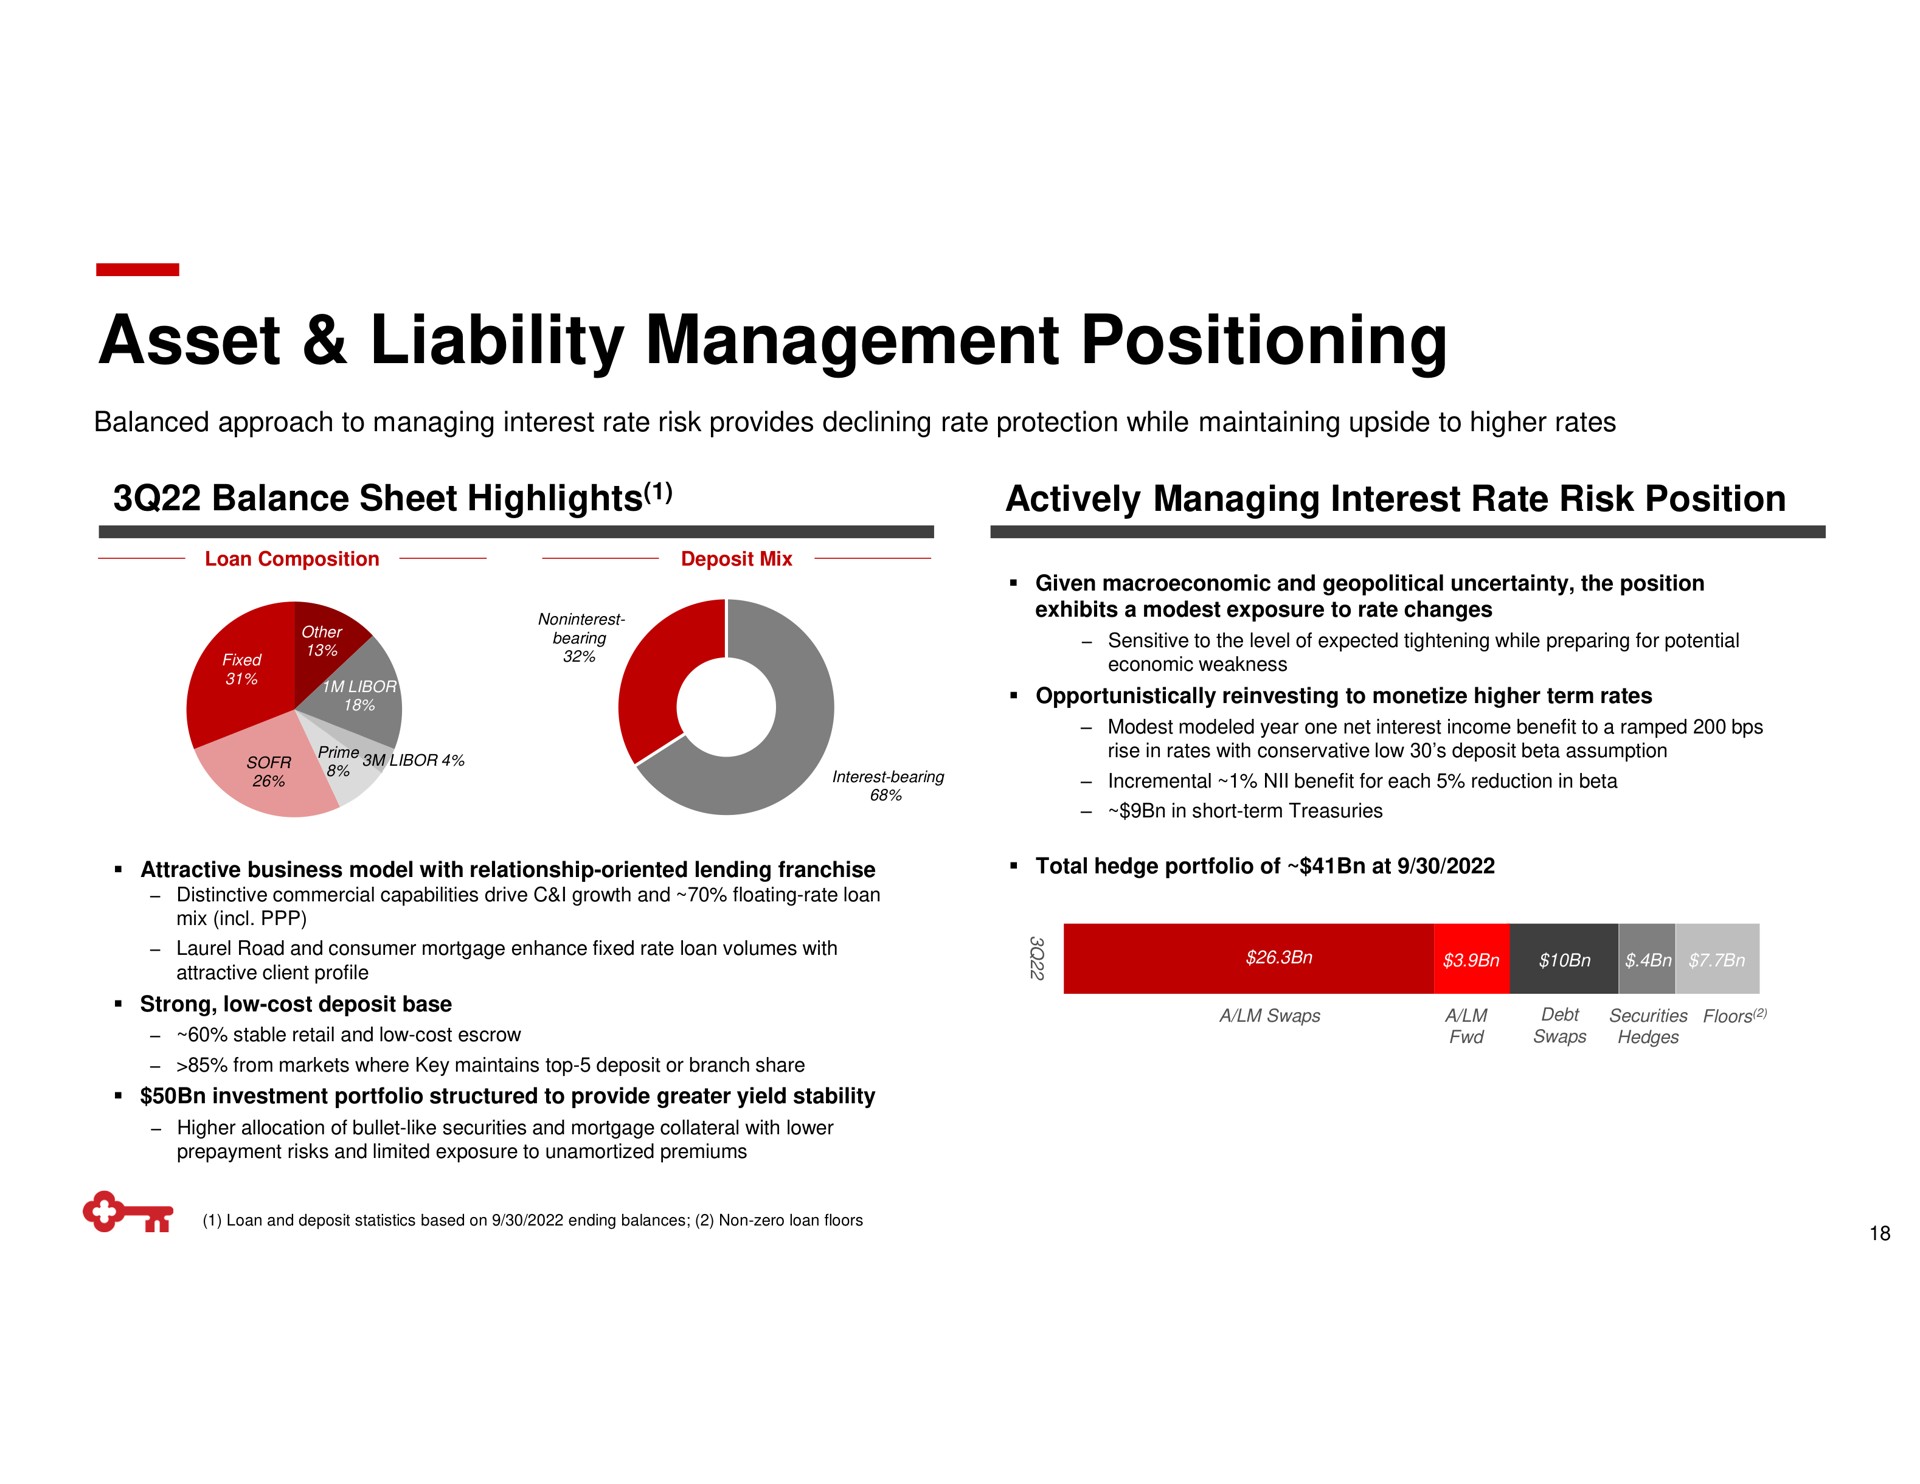 asset liability management positioning balance sheet highlights actively managing interest rate risk position | KeyCorp